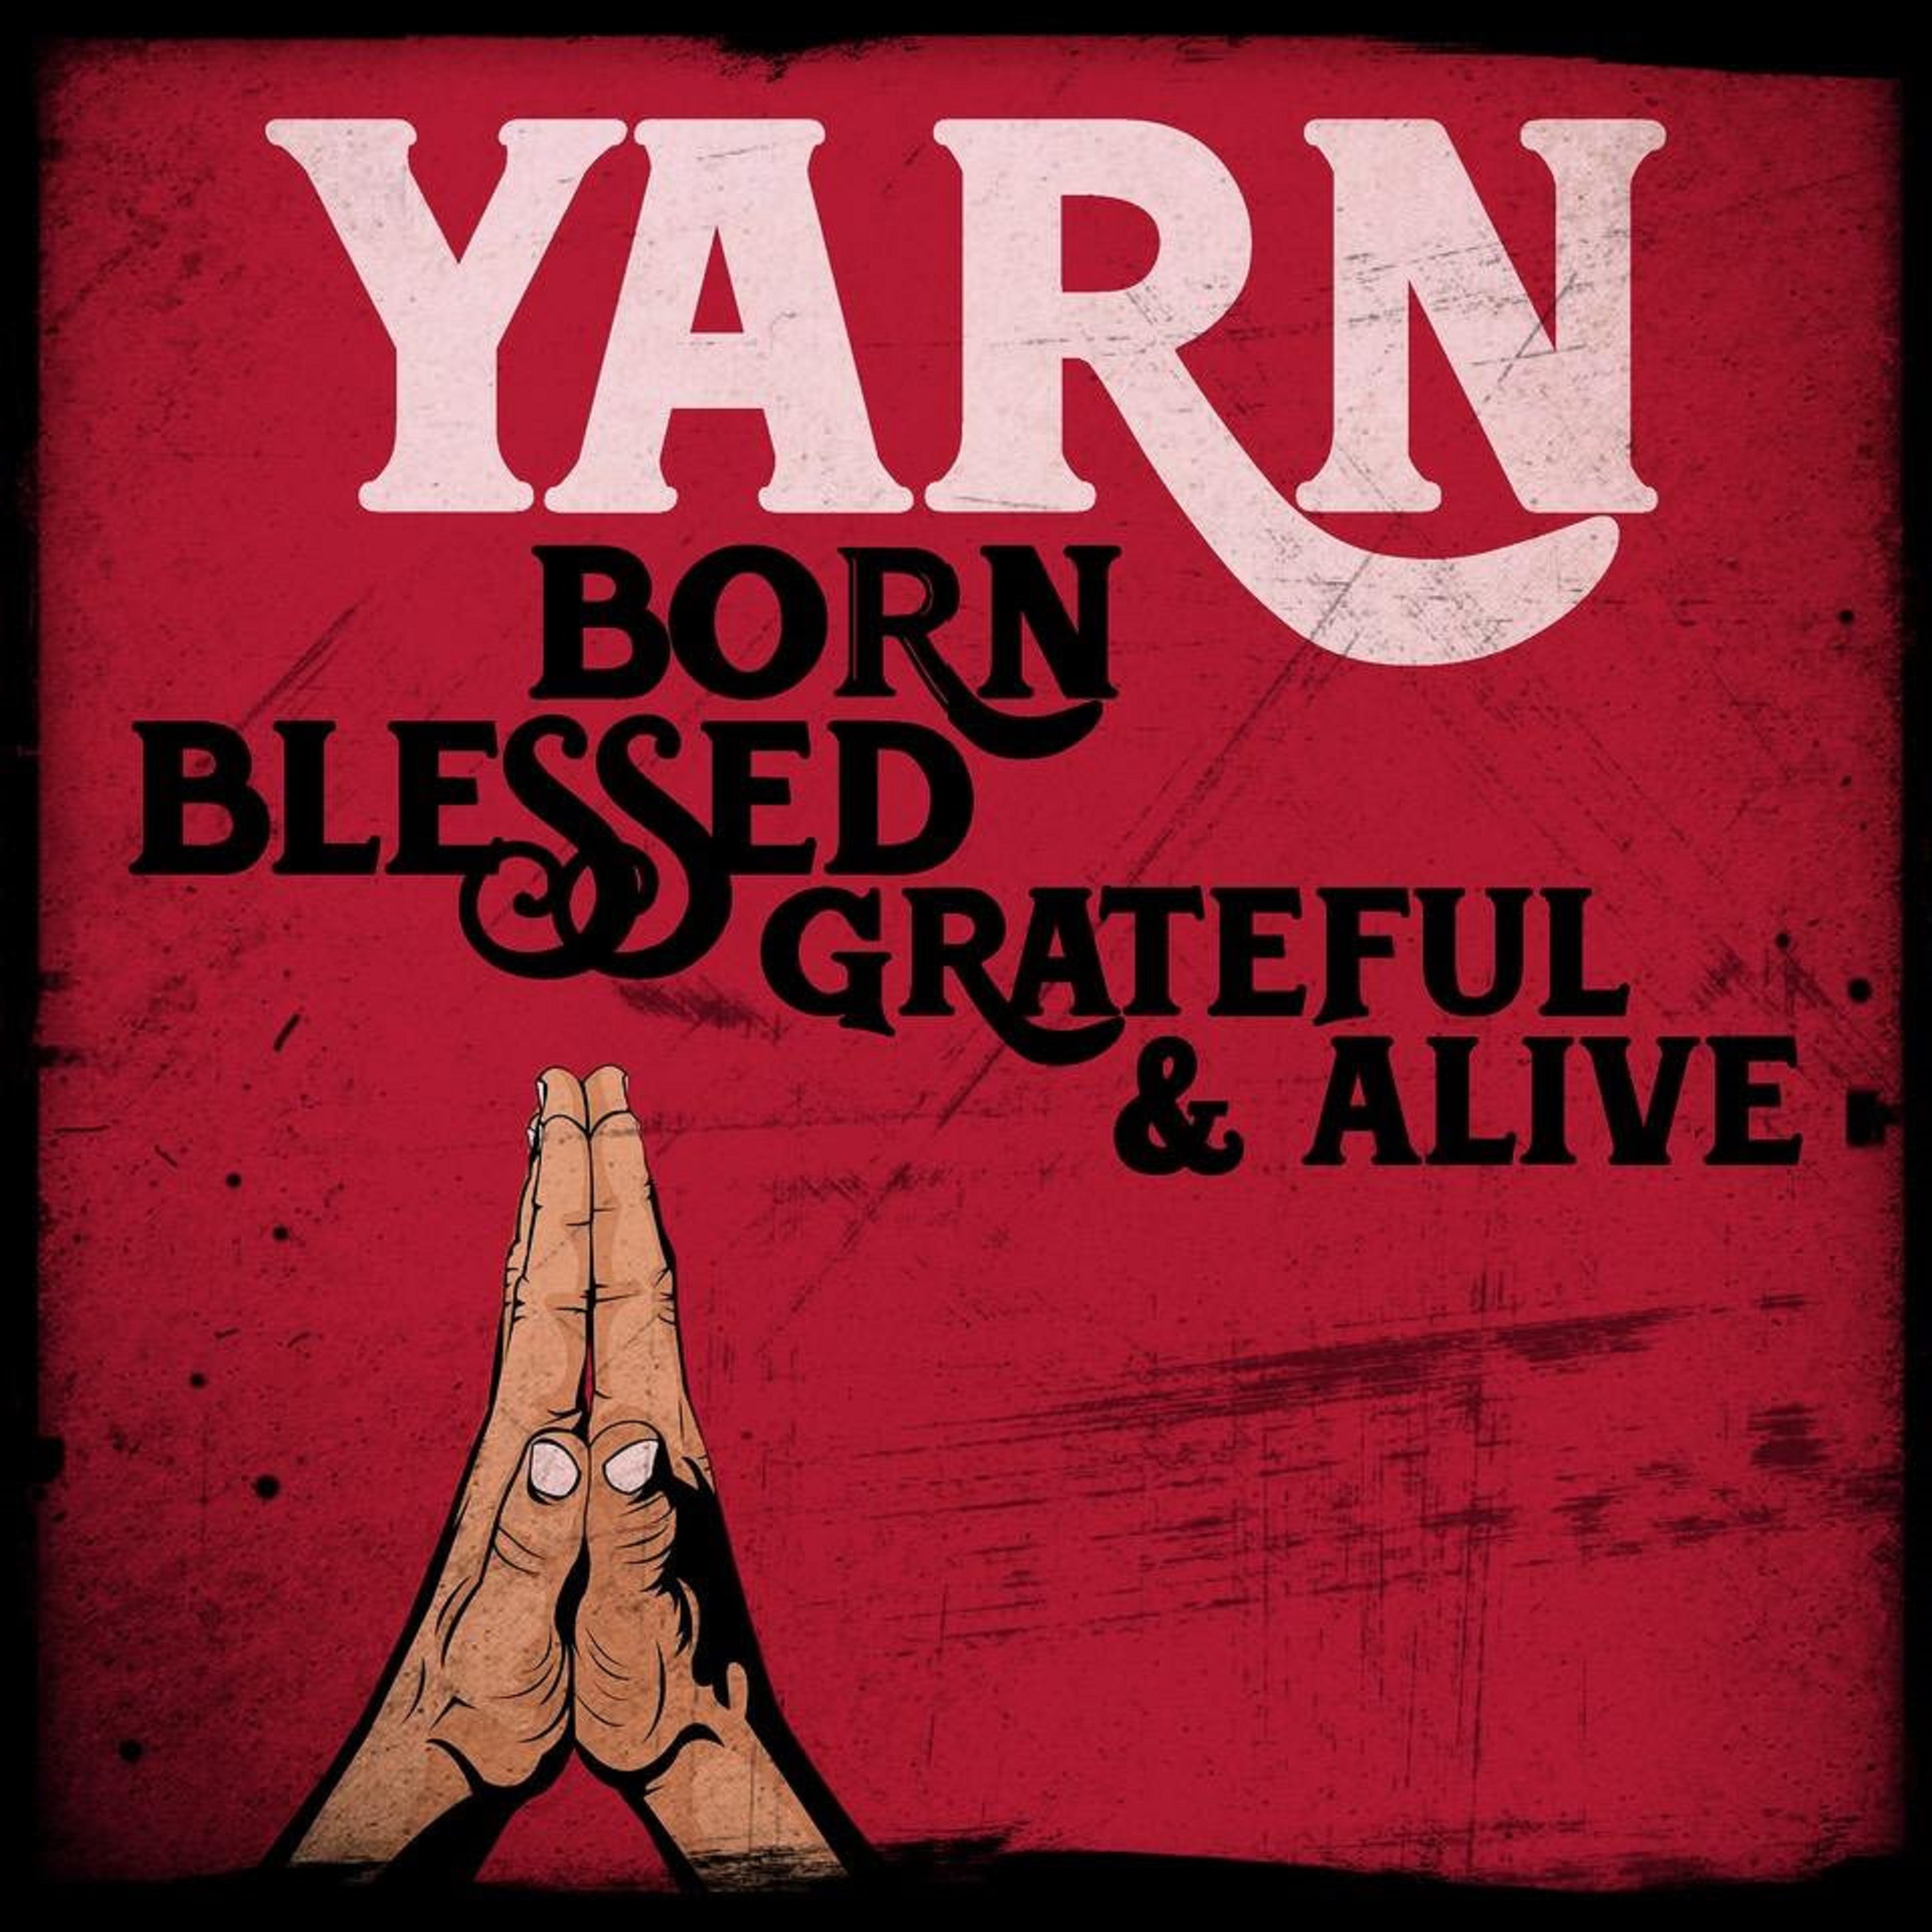 YARN THE NC-VIA NYC BAND RETURNS WITH THEIR FIRST STUDIO ALBUM IN EIGHT YEARS, BORN, BLESSED, GRATEFUL & ALIVE